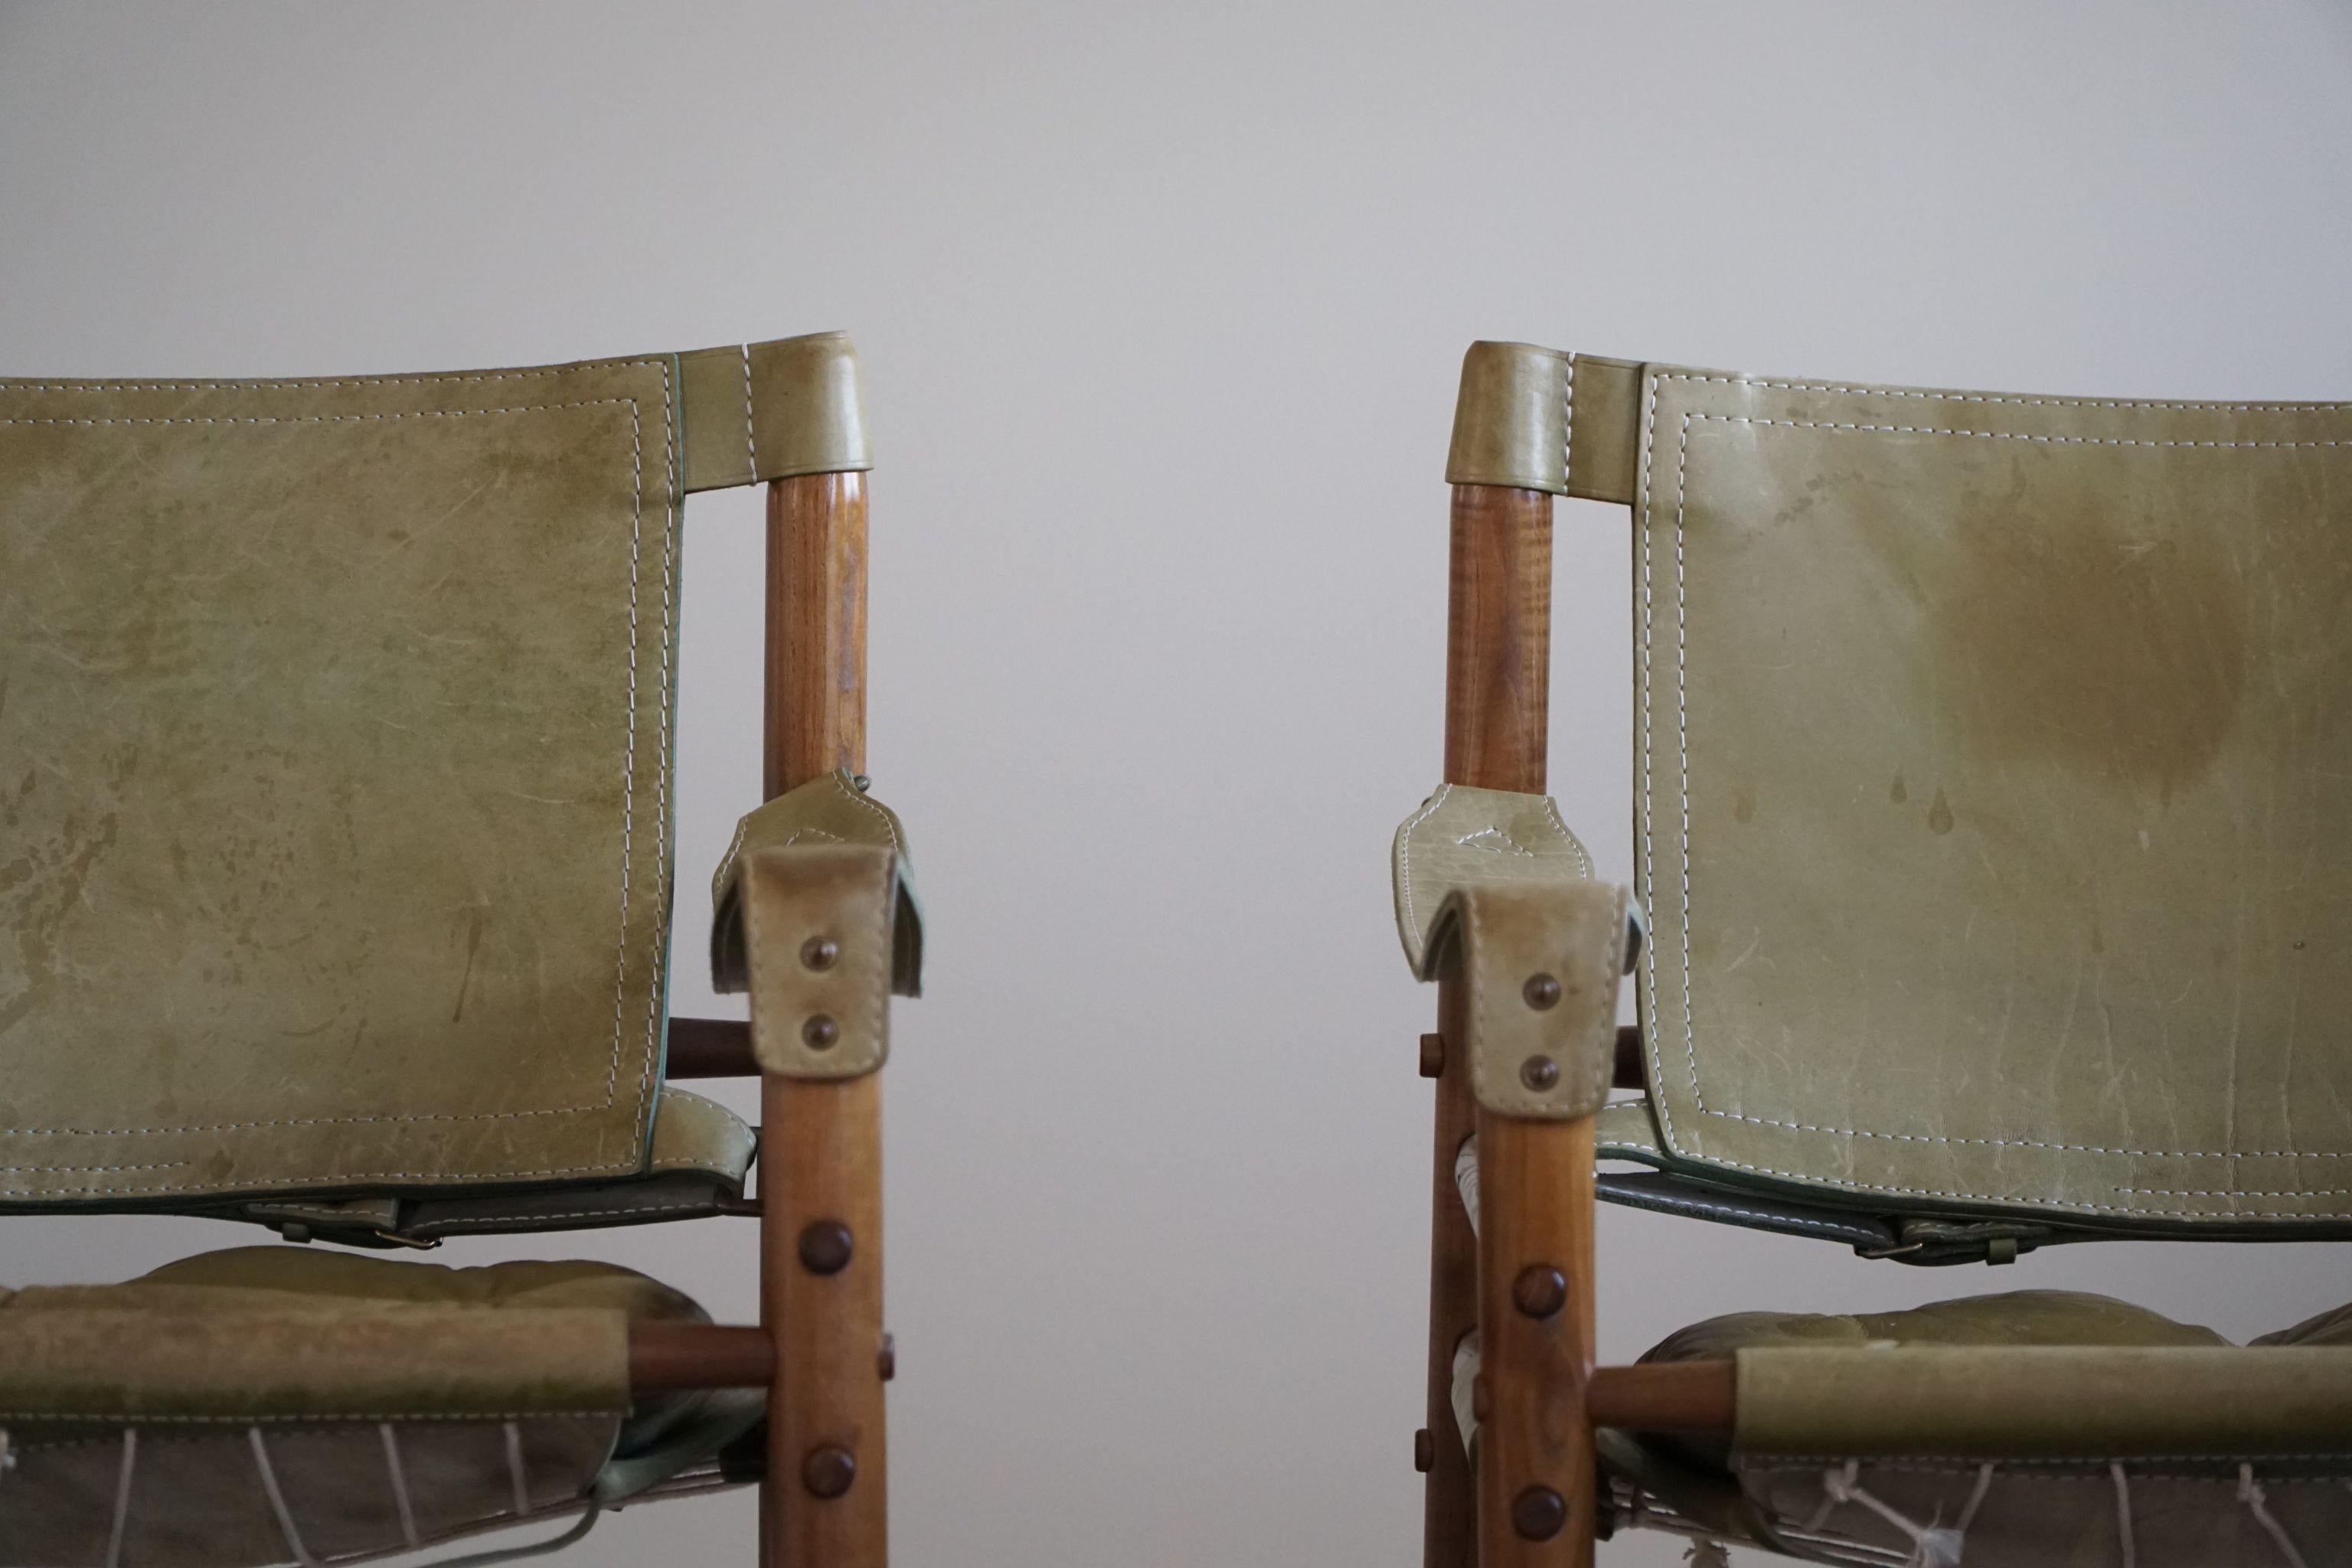 Pair of Sirocco Safari Chairs, Made by Arne Norell AB in Aneby, Sweden, 1960s 3